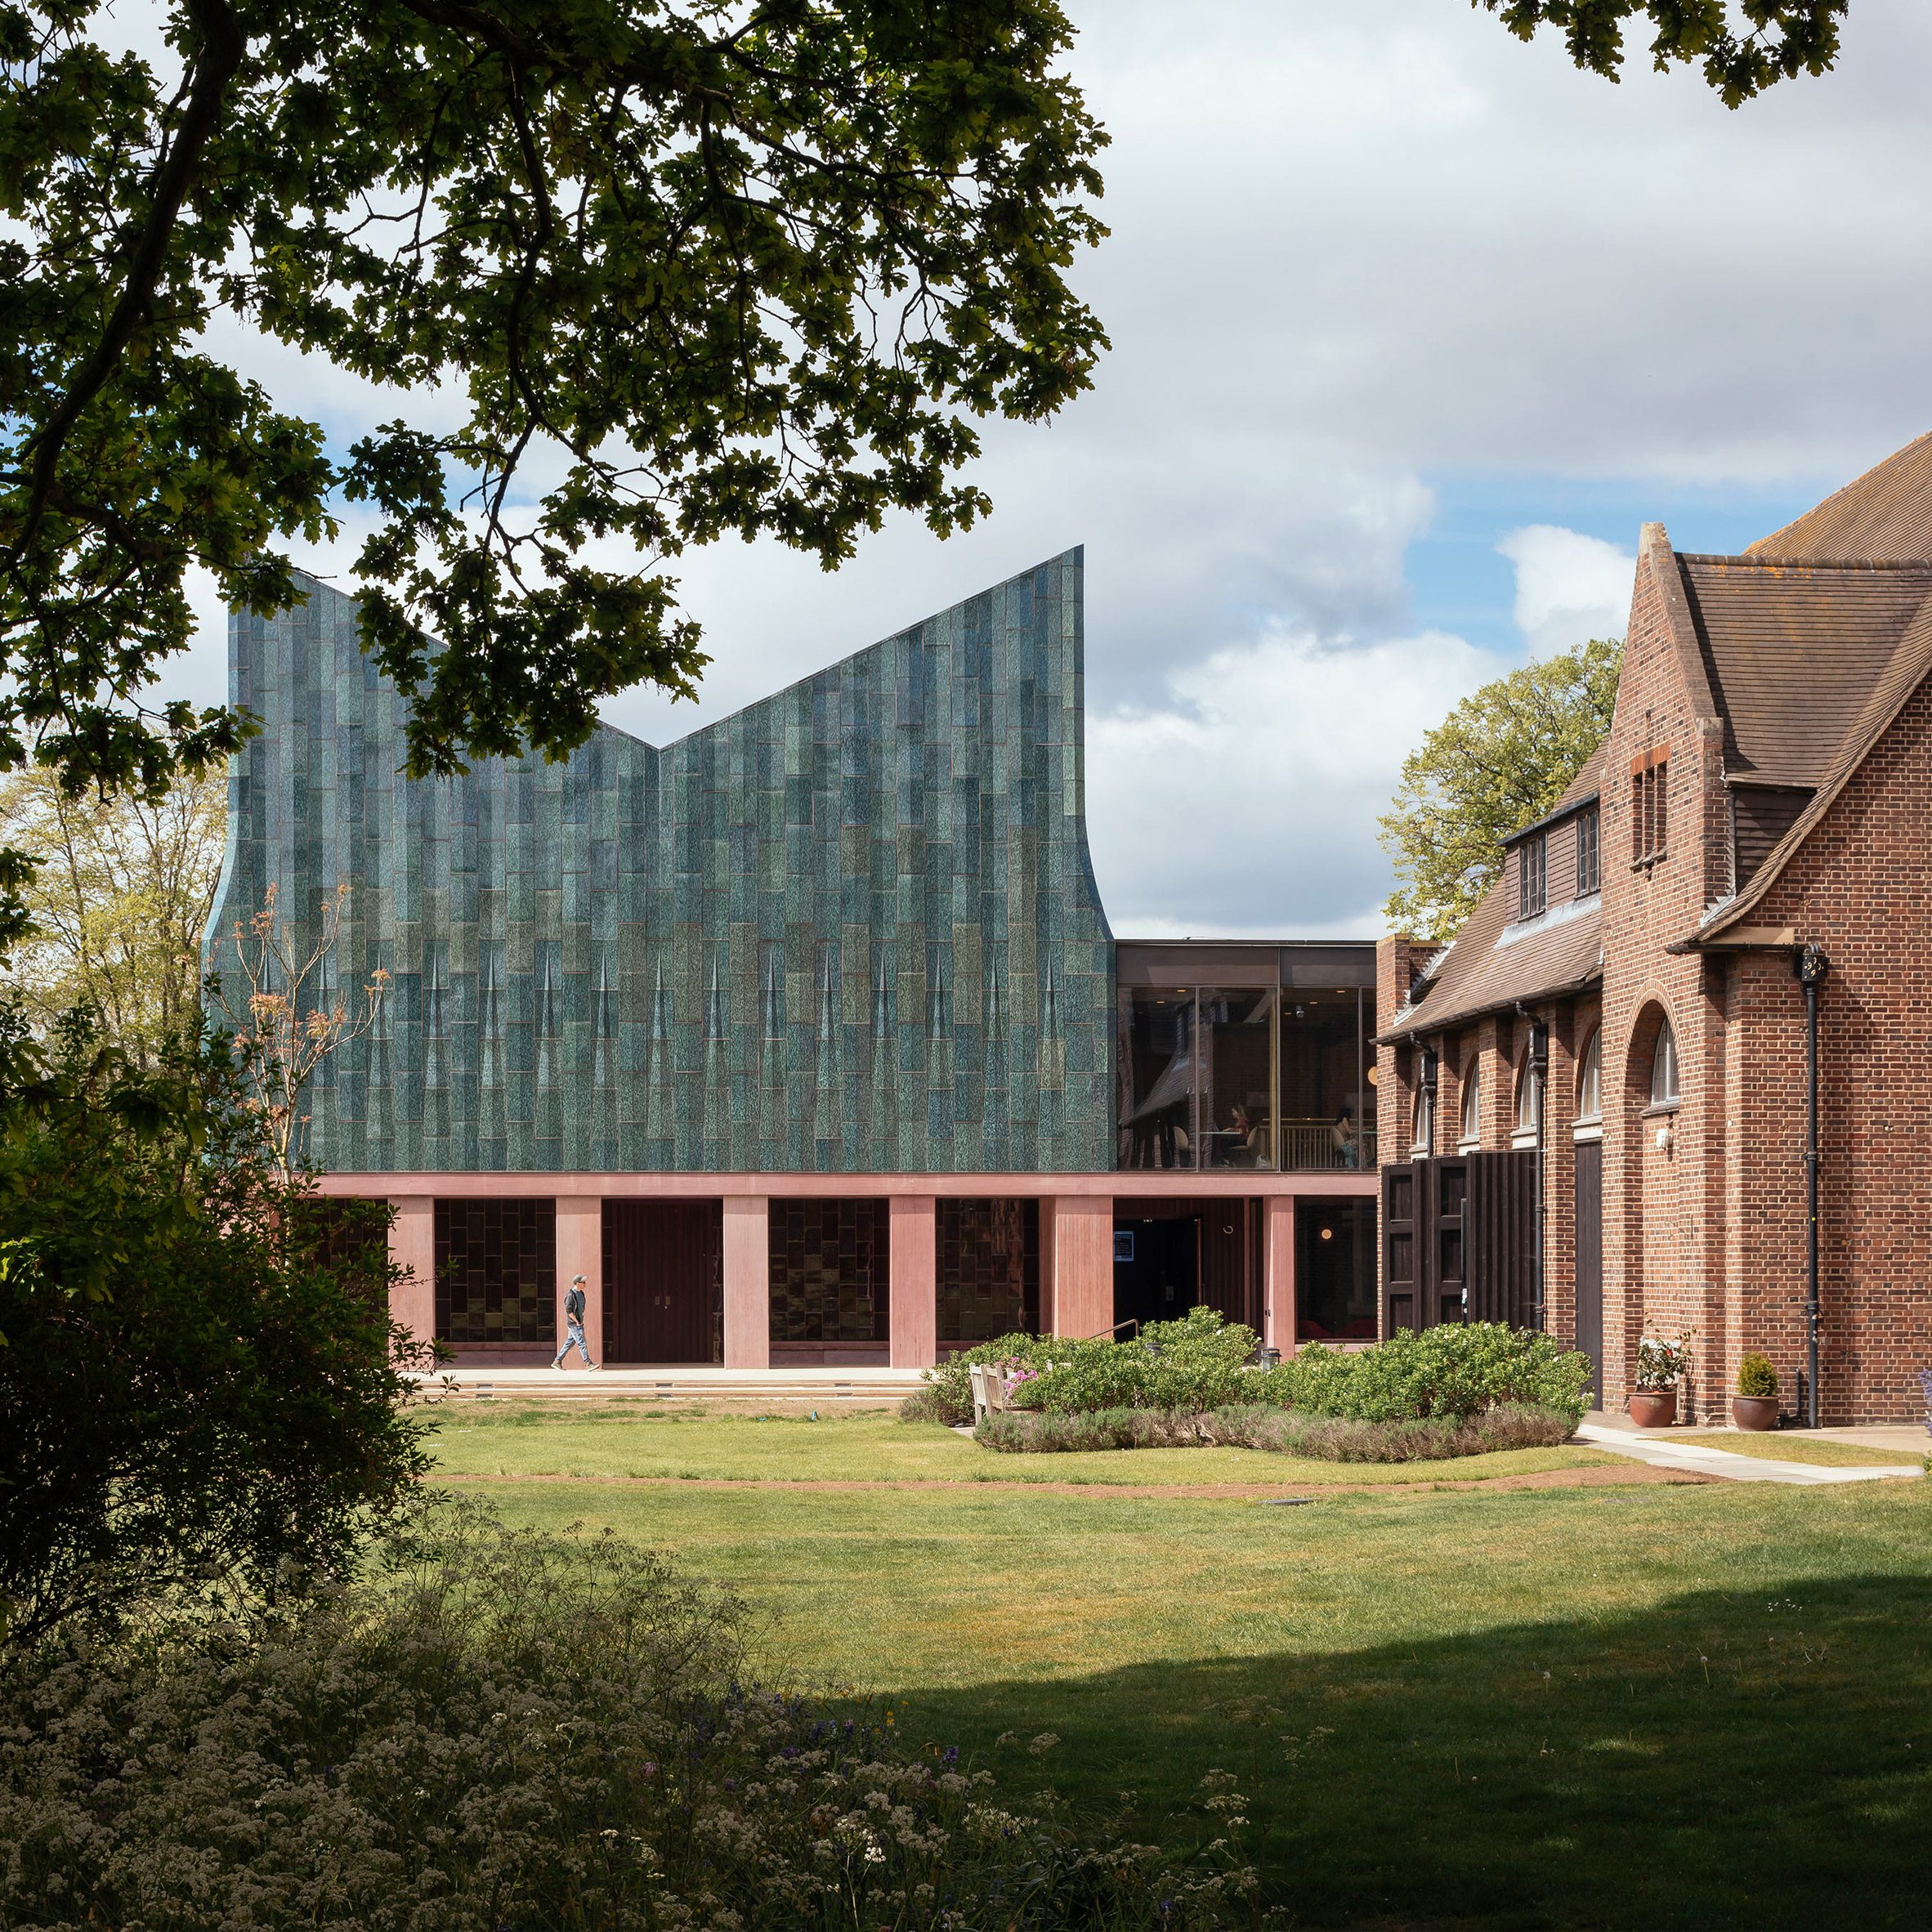 Feilden Fowles' dining hall for the University of Cambridge